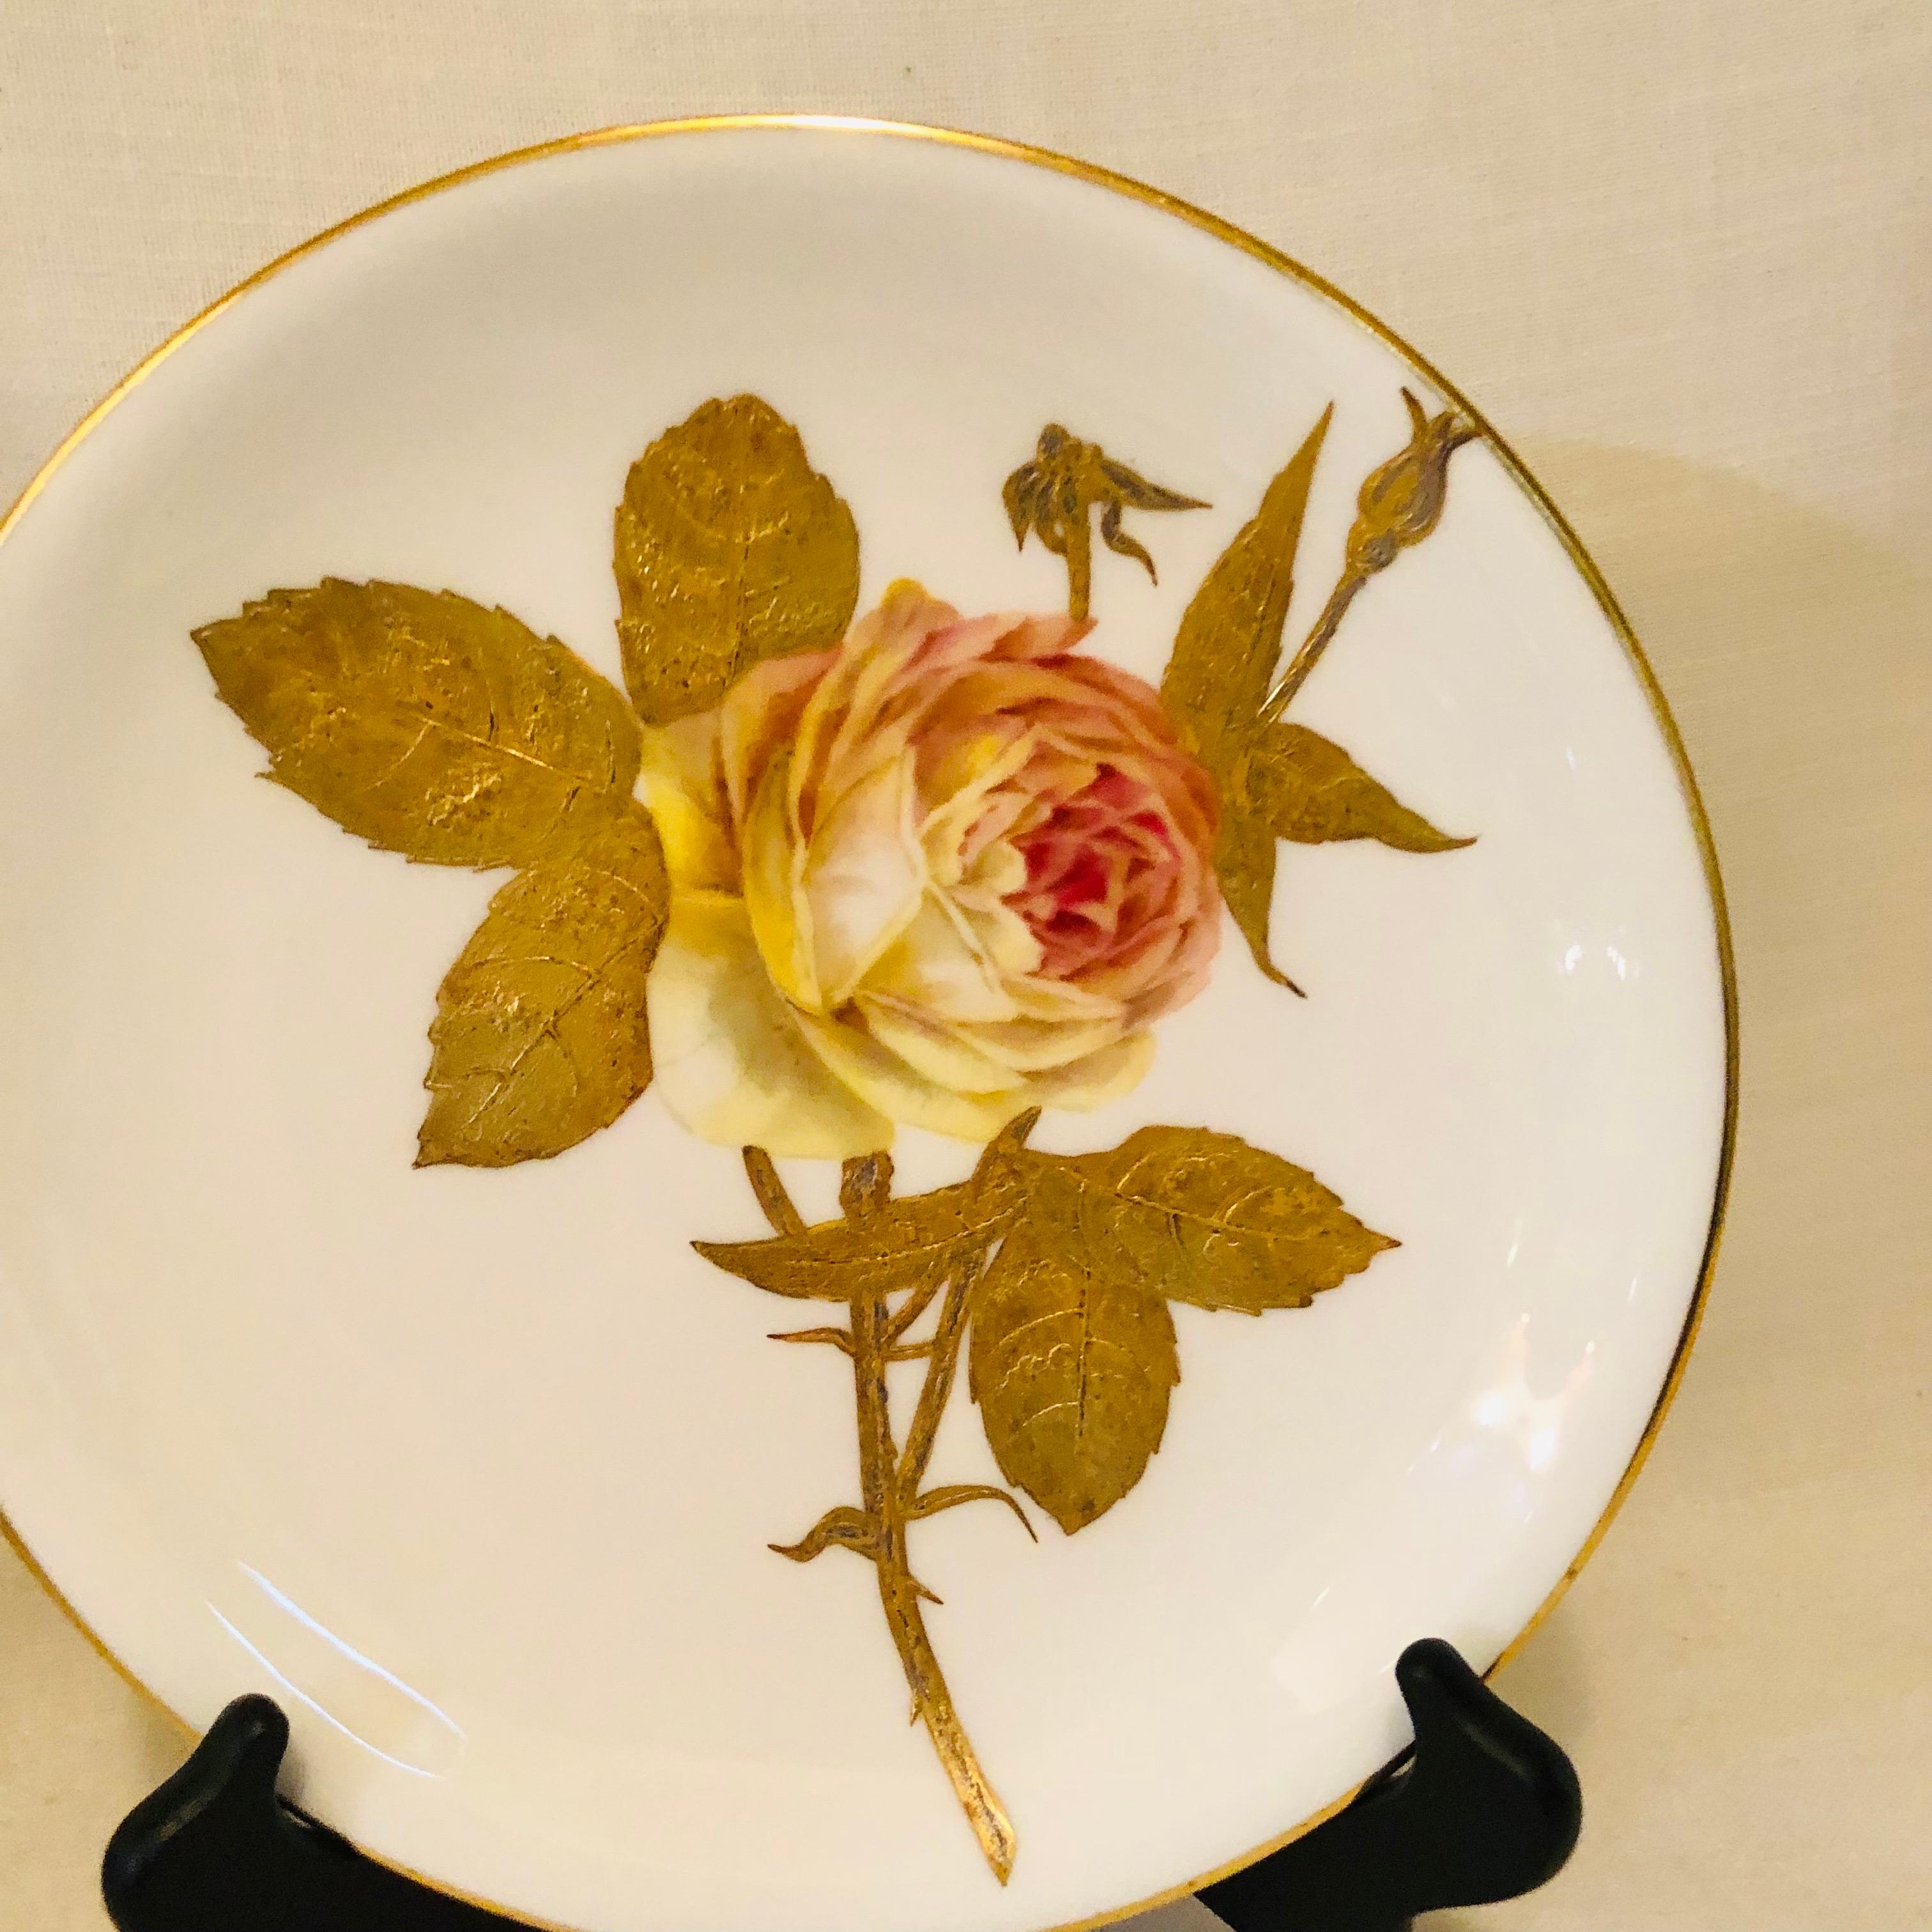 Minton Plates Each Painted With a Different Rose With Gold and Platinum Accents 8